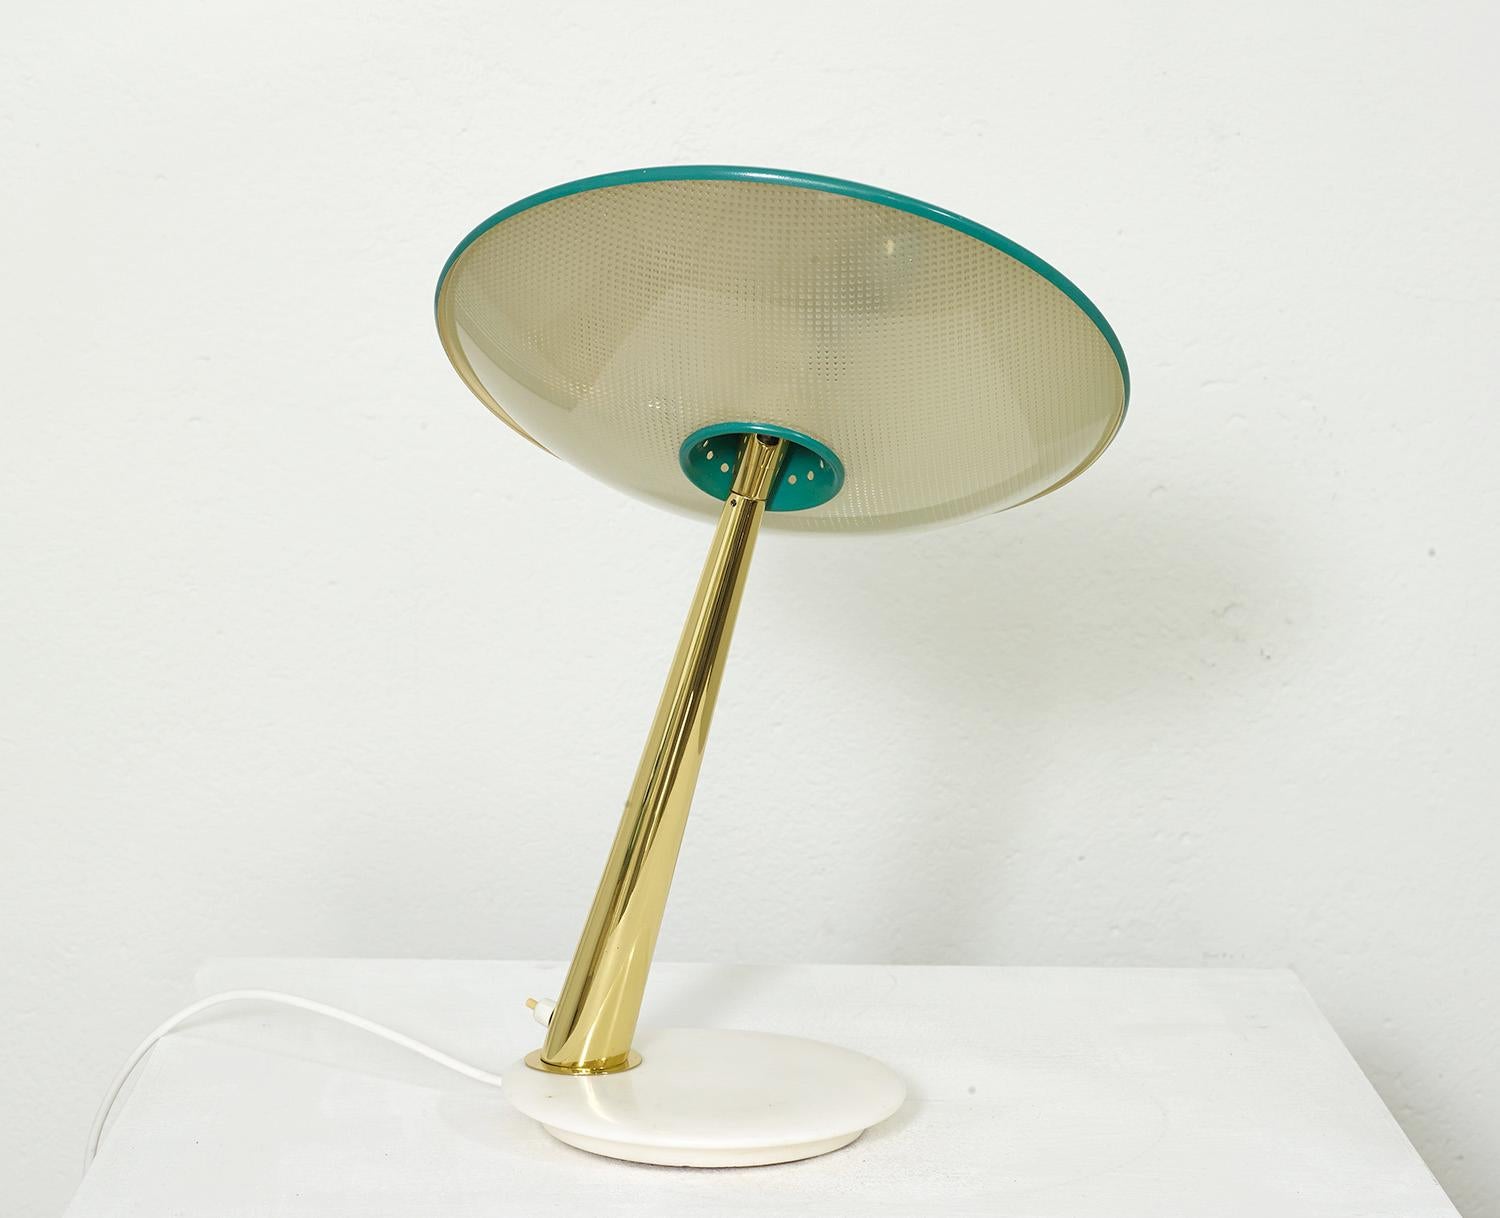 Italian brass and glass table lamp by Giuseppe Ostuni for Oluce, 1950.

This gorgeous table lamp has a round marble base with a brass stem and an adjustable saucer shaped reflector. The reflector is composed of an embossed glass diffuser and a